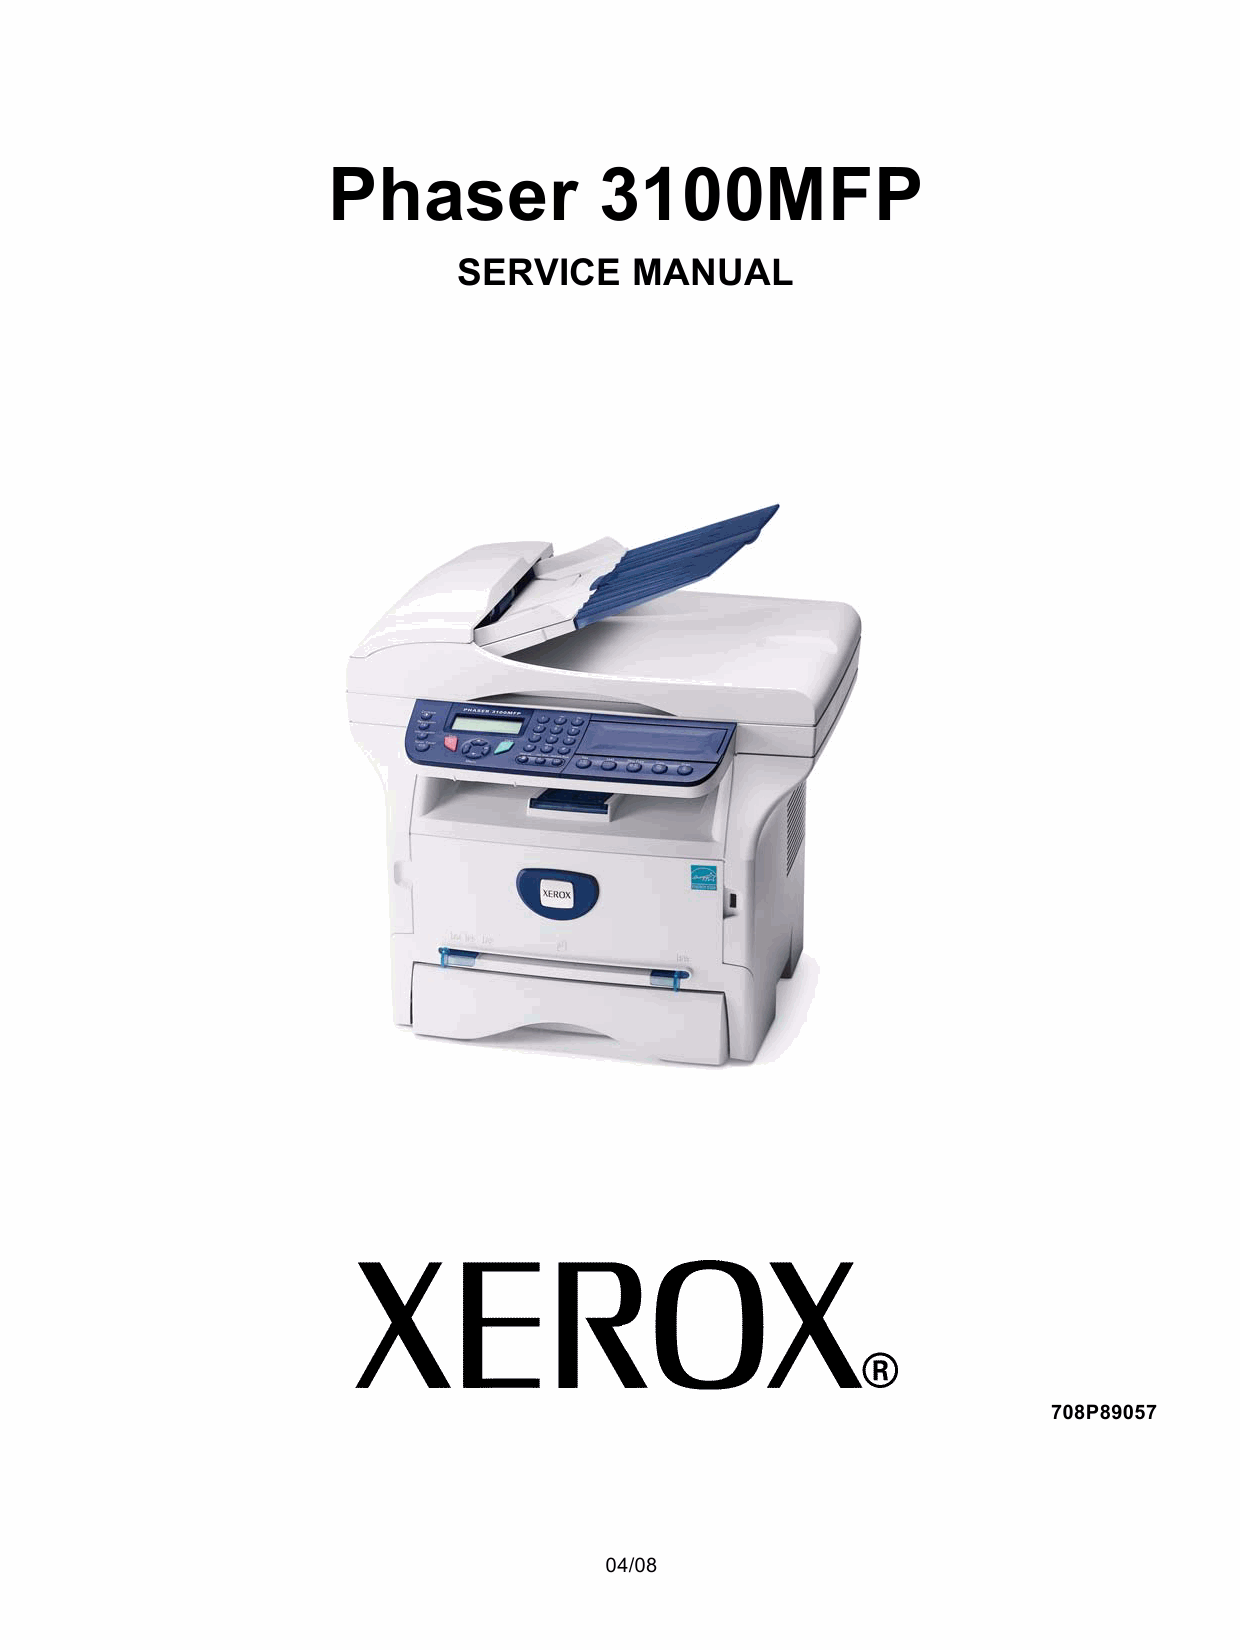 Xerox Phaser 3100-MFP Parts List and Service Manual-1